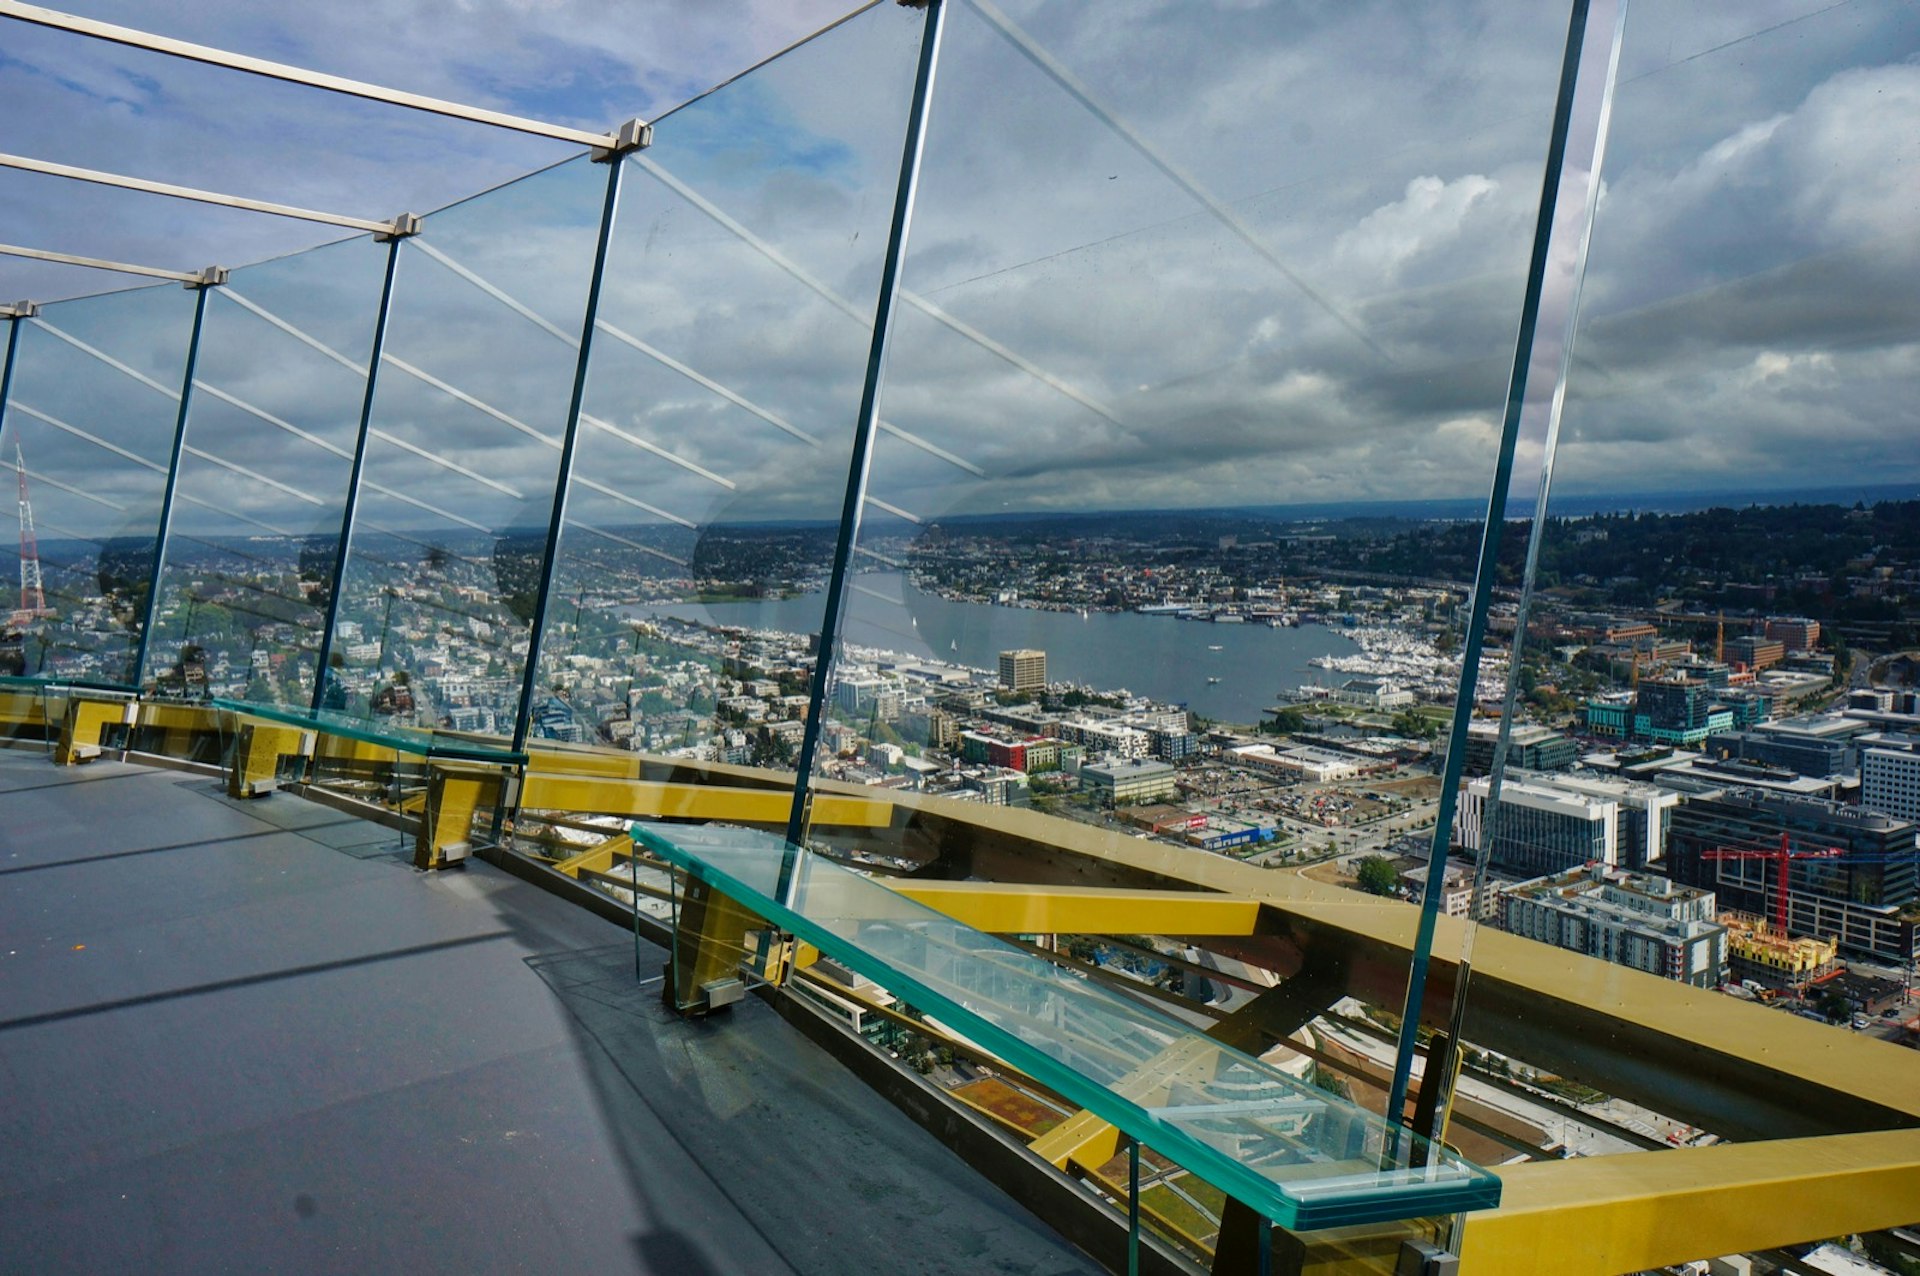 Curved glass panels surround an observation deck hundreds of feet in the sky as the city unfolds beyond 